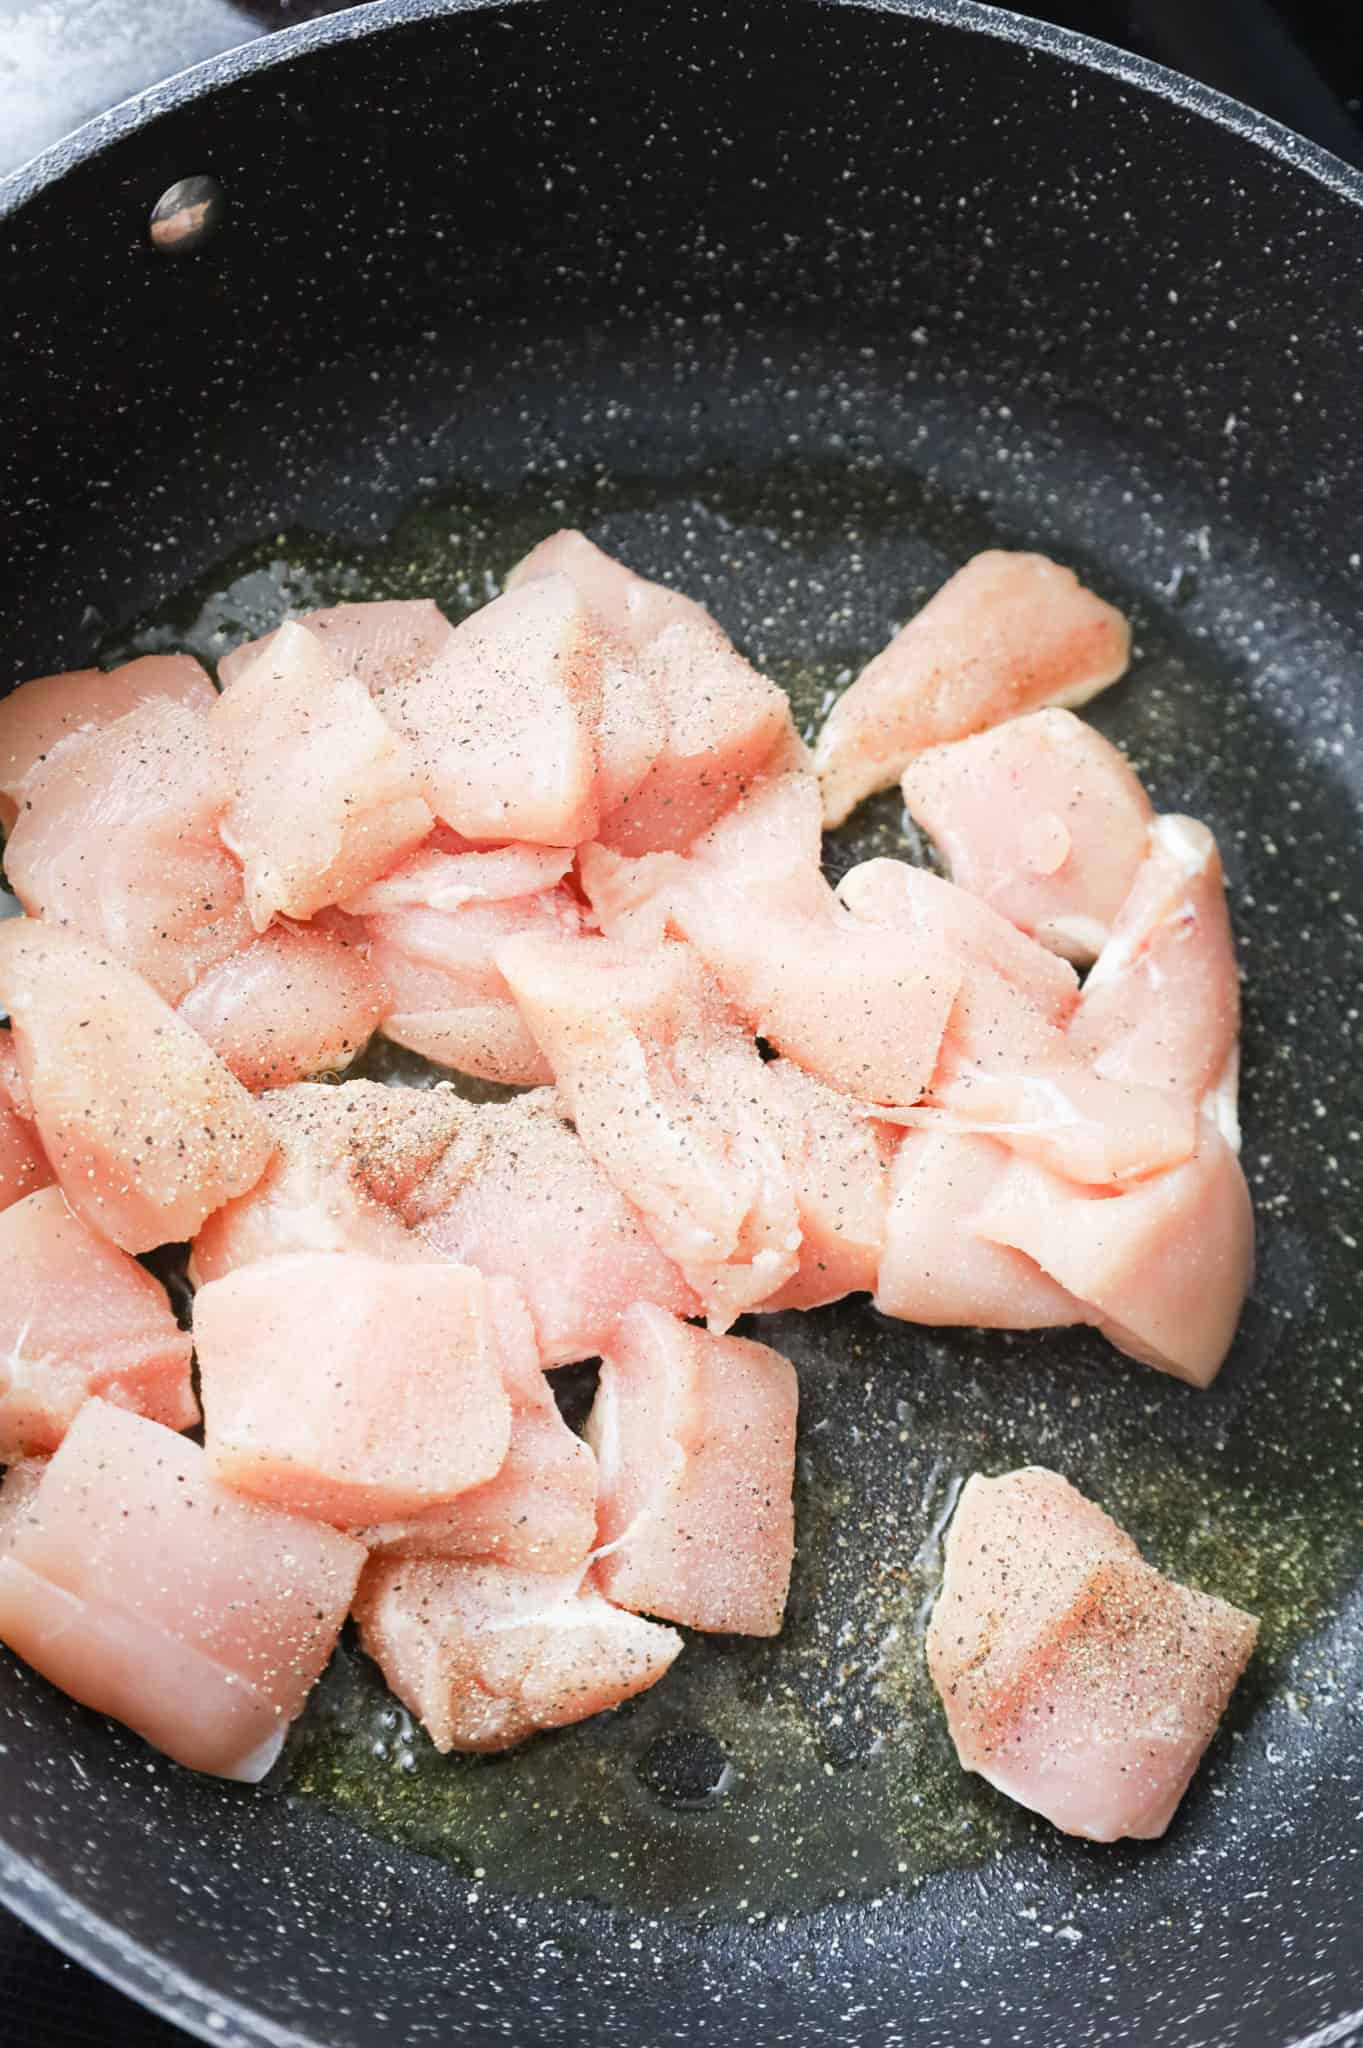 salt and pepper sprinkled on chicken breast chunks in a skillet